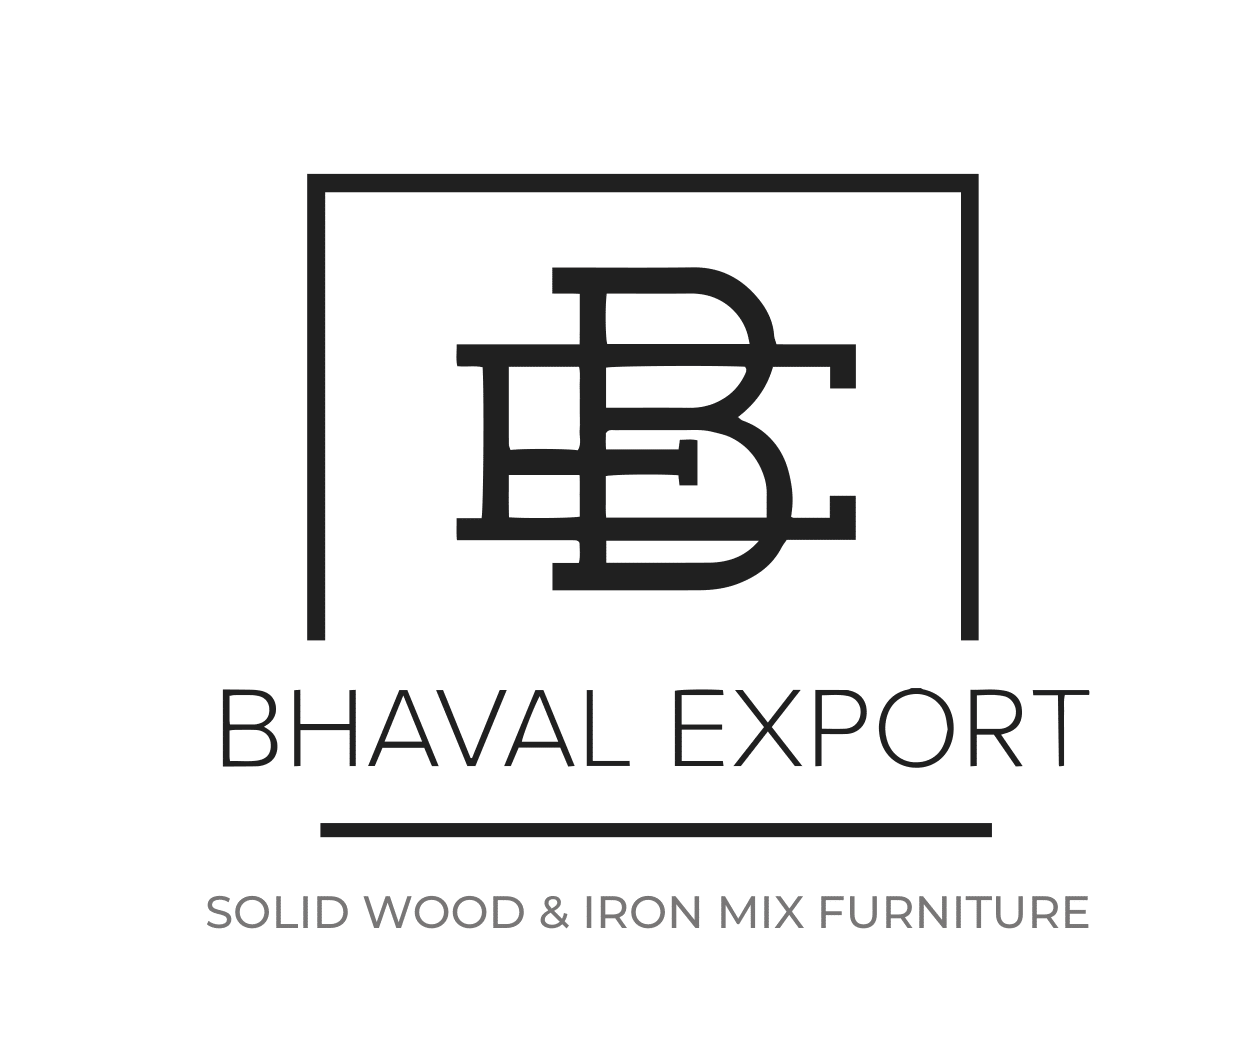 Bhaval exports